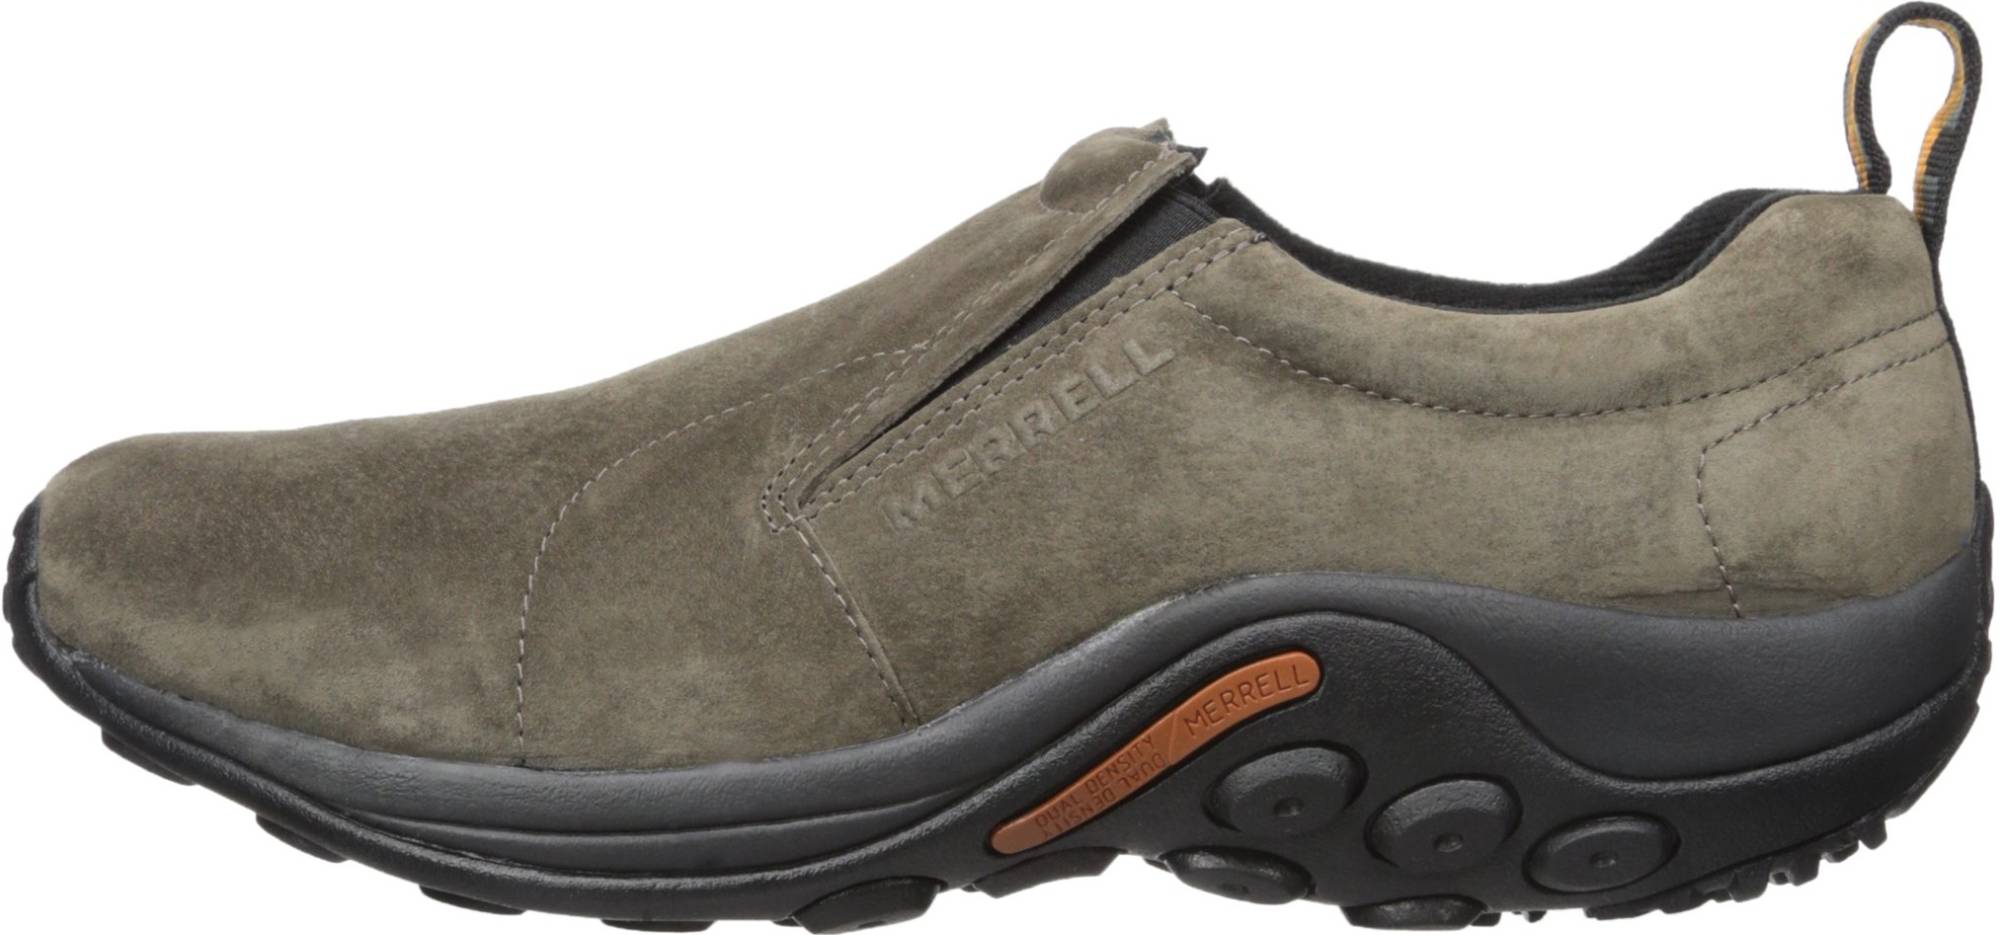 Merrell Jungle Moc sneakers in 10+ (only $45) | RunRepeat